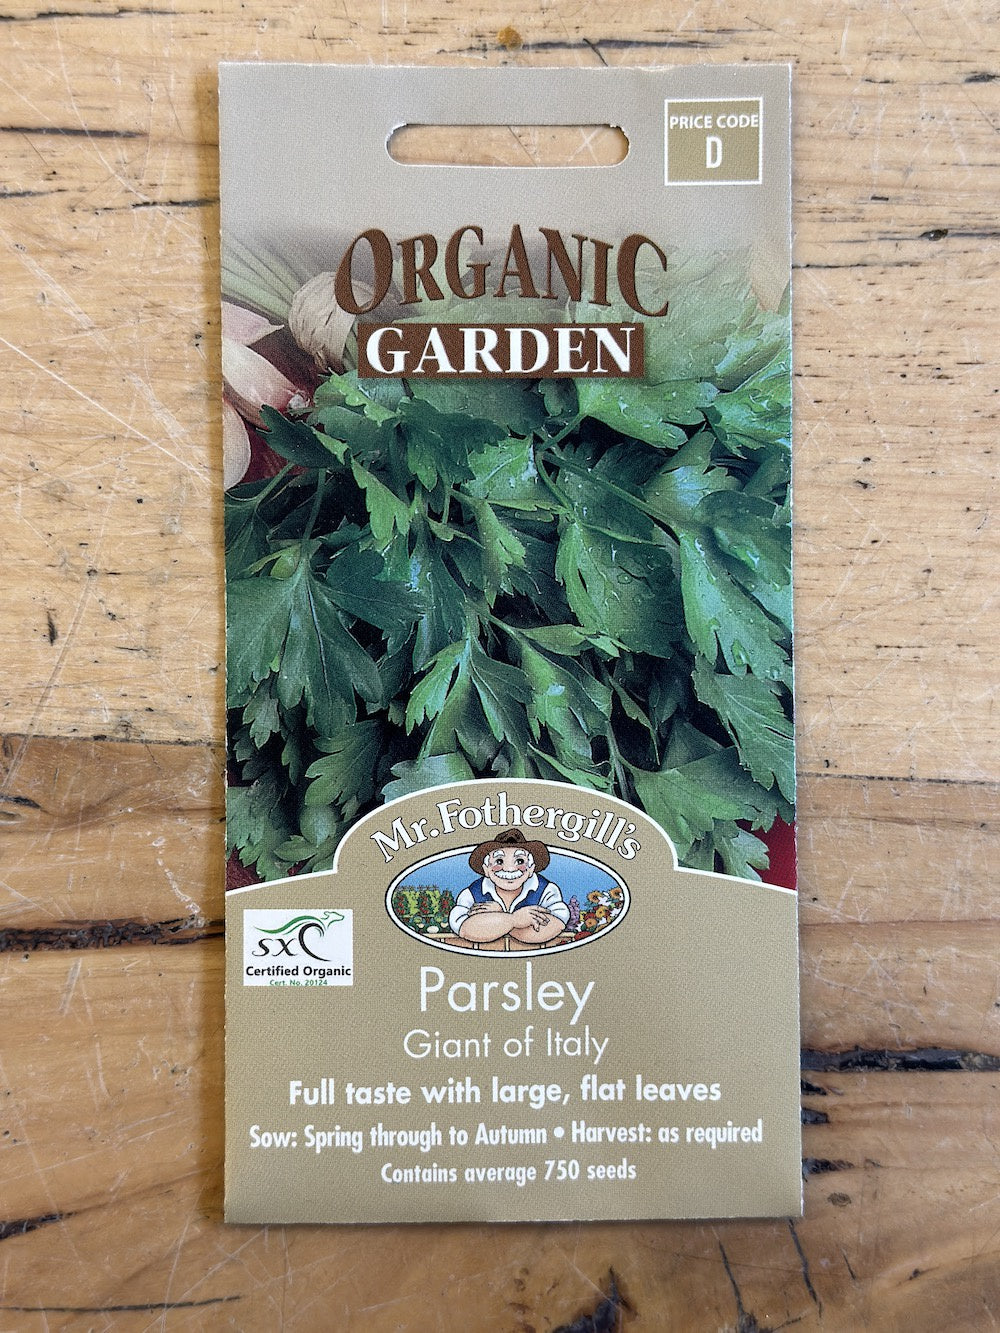 Parsley 'Giant of Italy' Organic Seeds